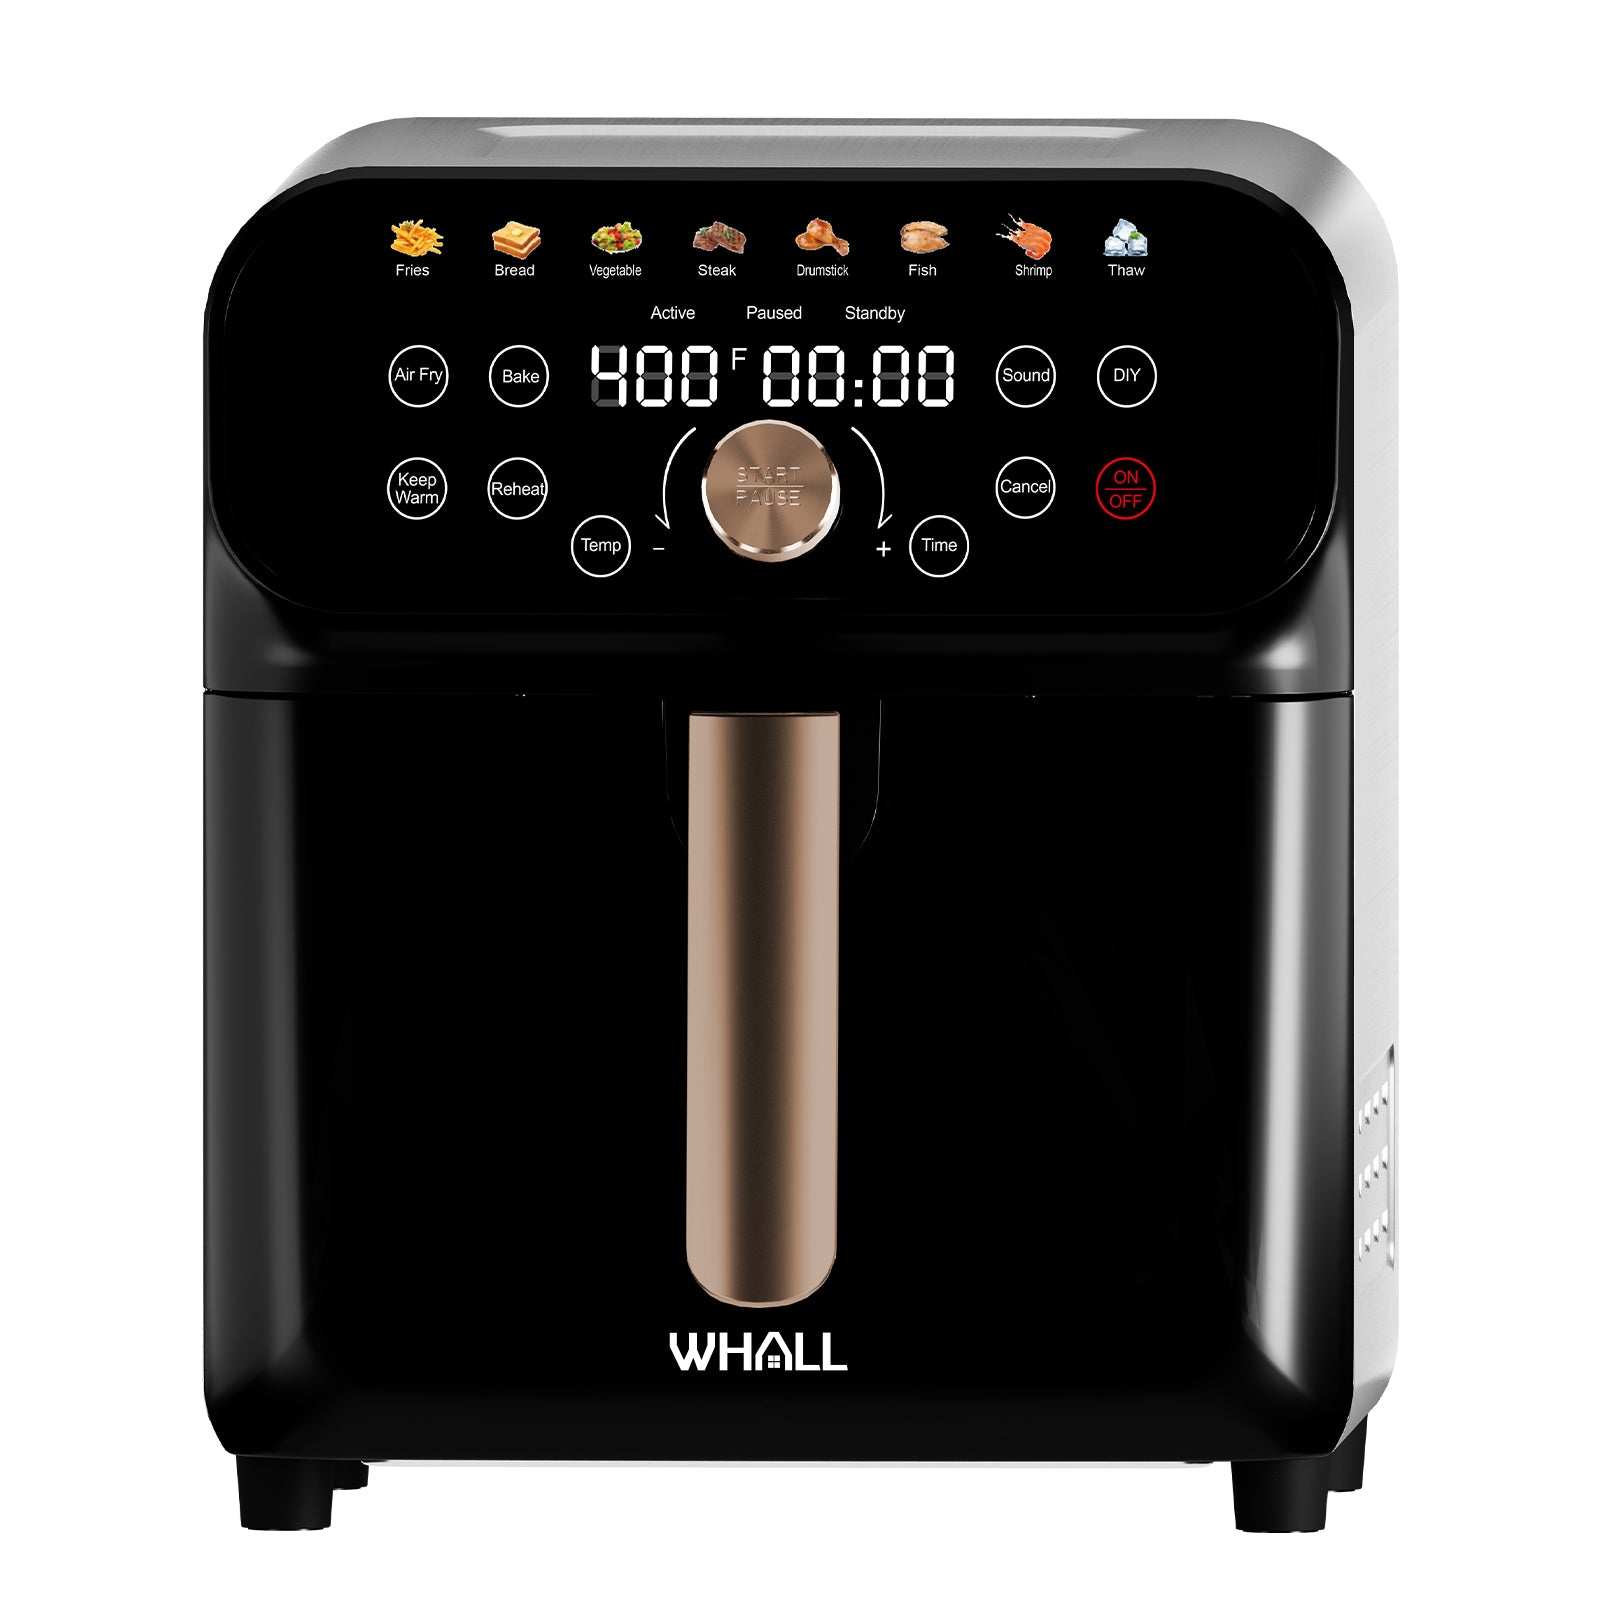 WHALL® Air Fryer, 6.3Qt Air Fryer Oven with LED Digital Touchscreen, Custom Presets, Nonstick and Dishwasher-Safe Basket, Stainless Steel/1600W